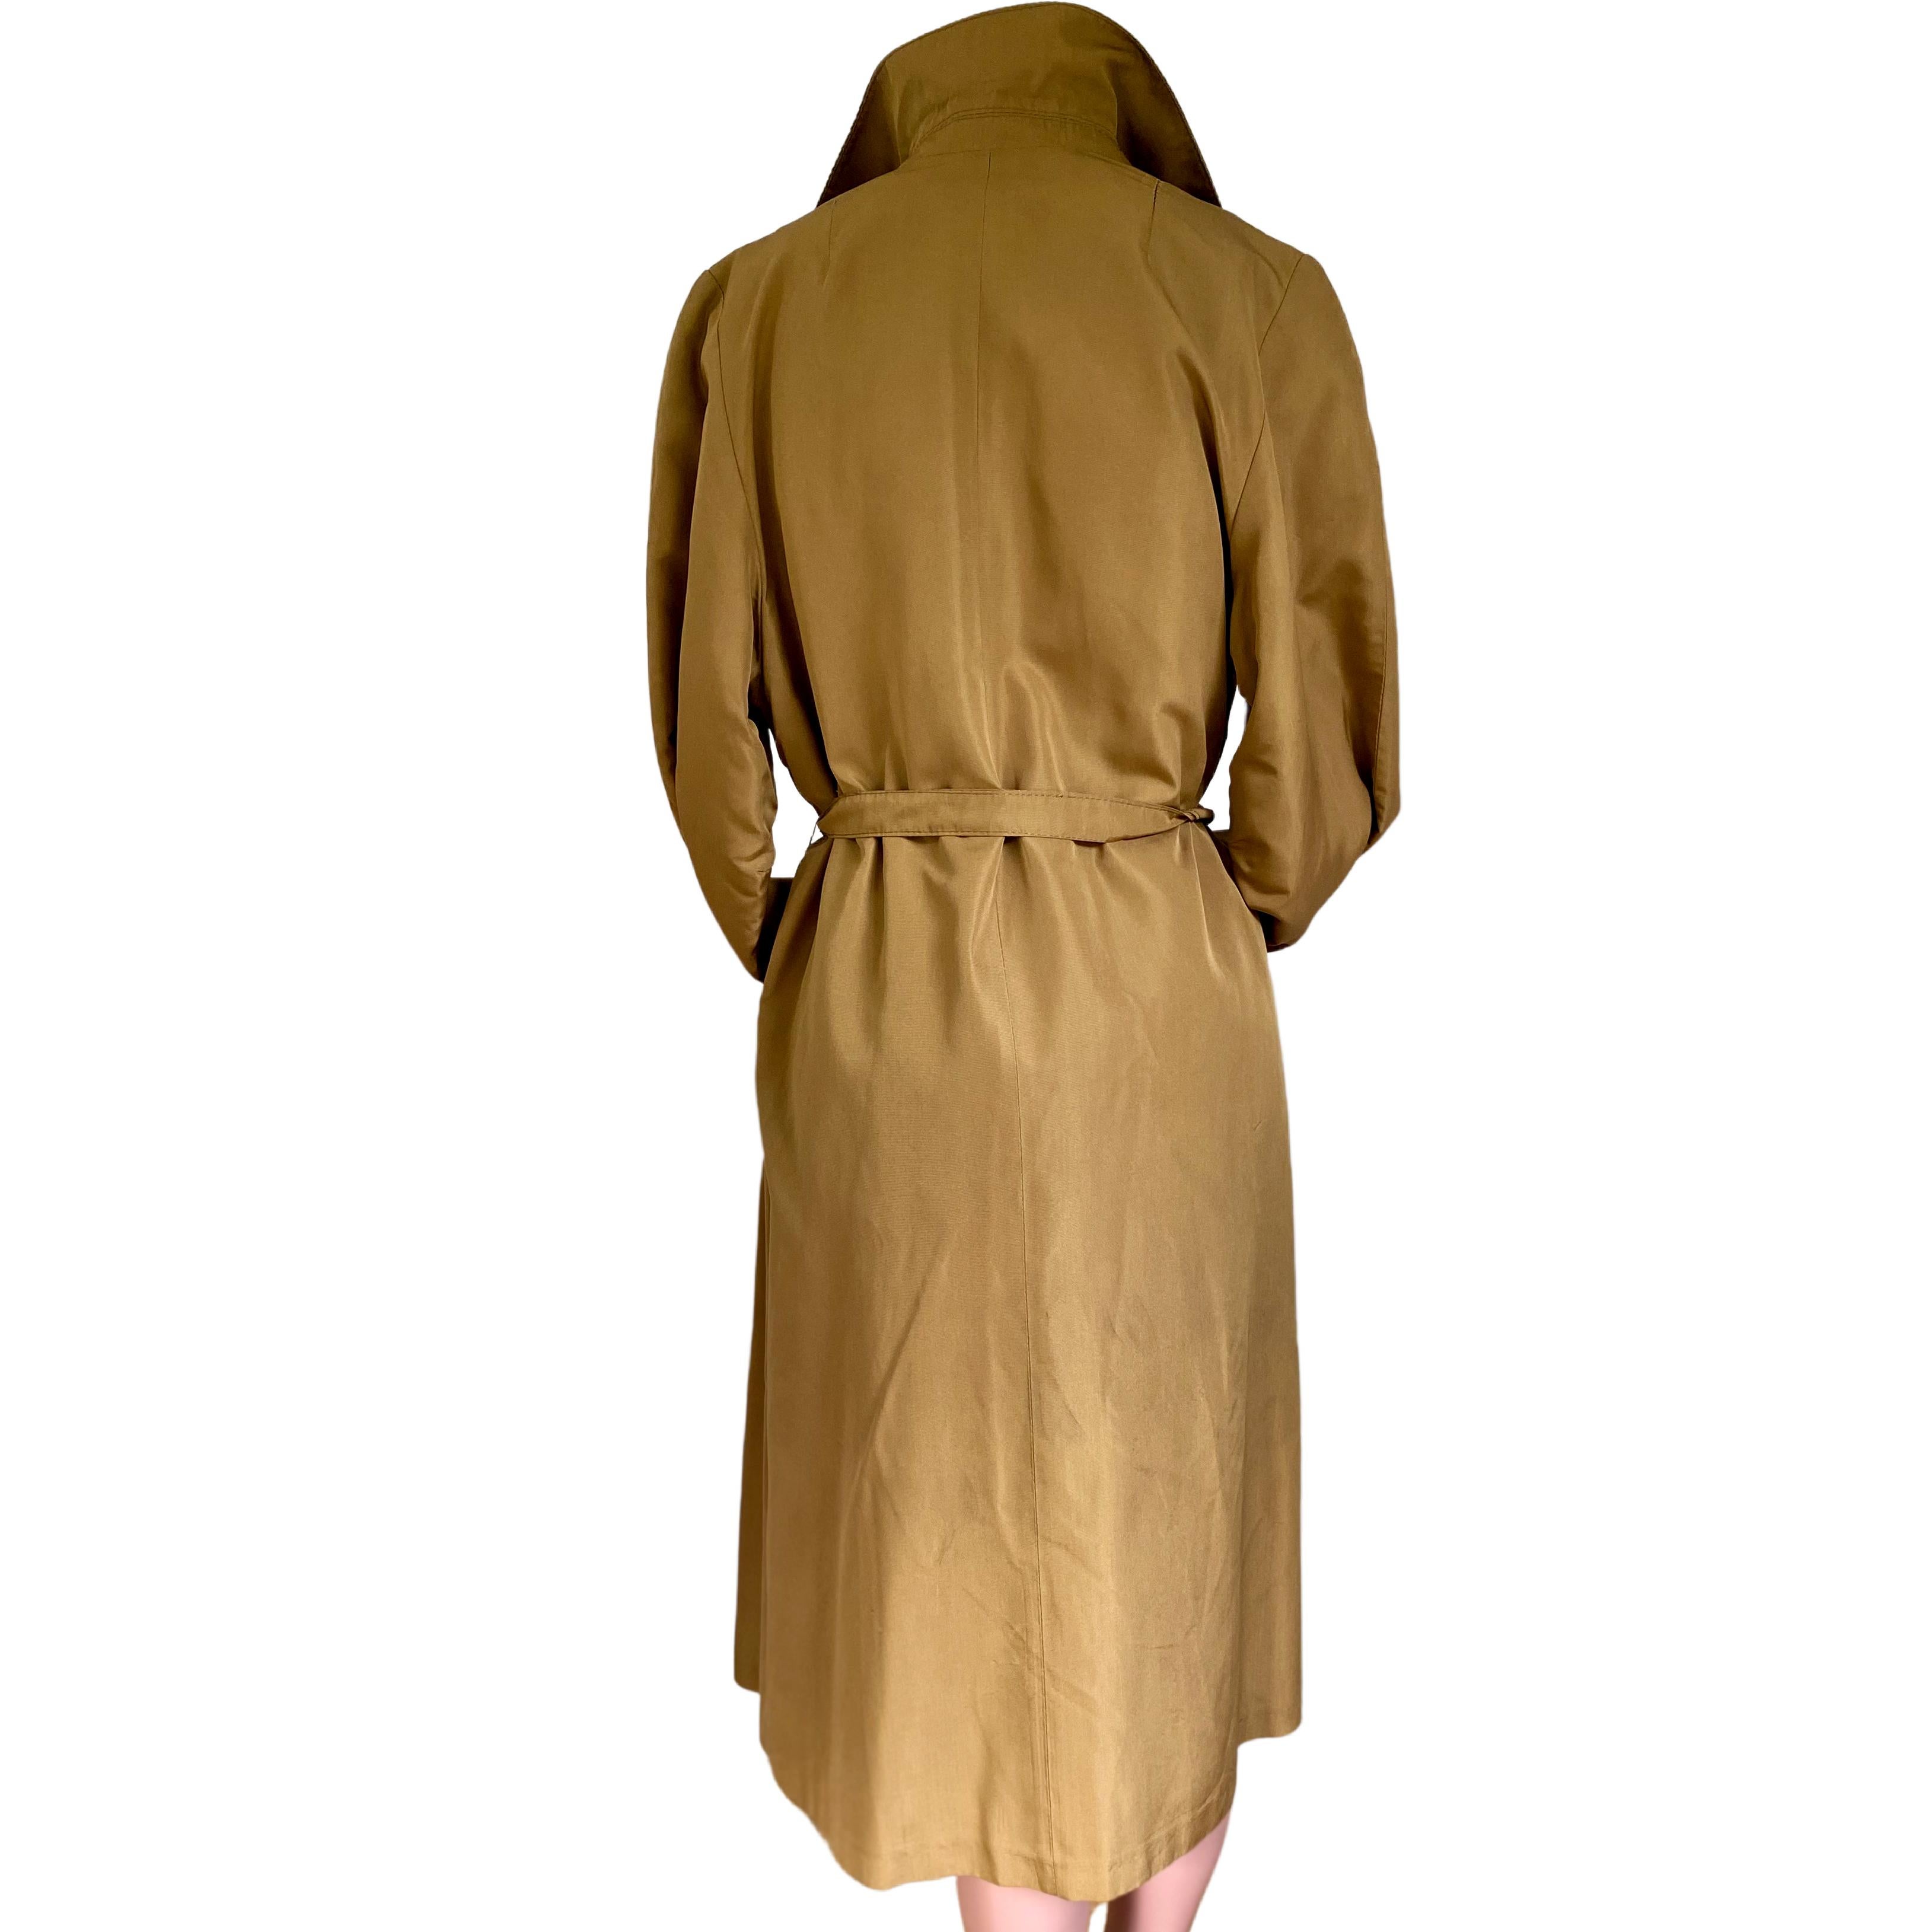 Brown Reveillon Paris weather-proof Trench Coat detachable Fur Collar and Lining 